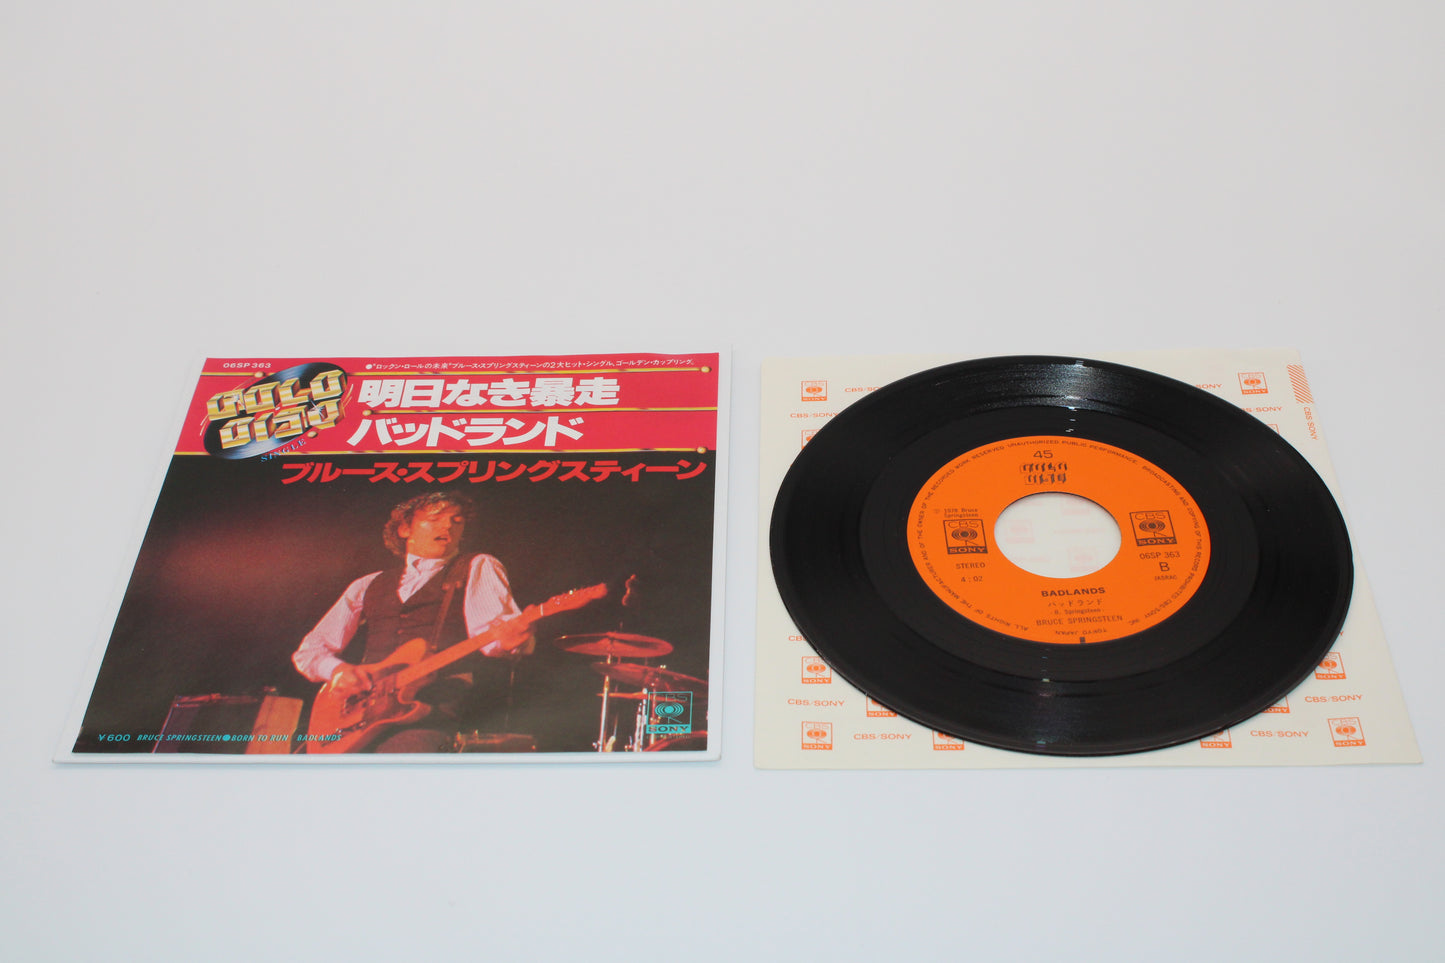 Bruce Springsteen 45 record BORN TO RUN & BADLANDS 1978 Japan Import Collectible